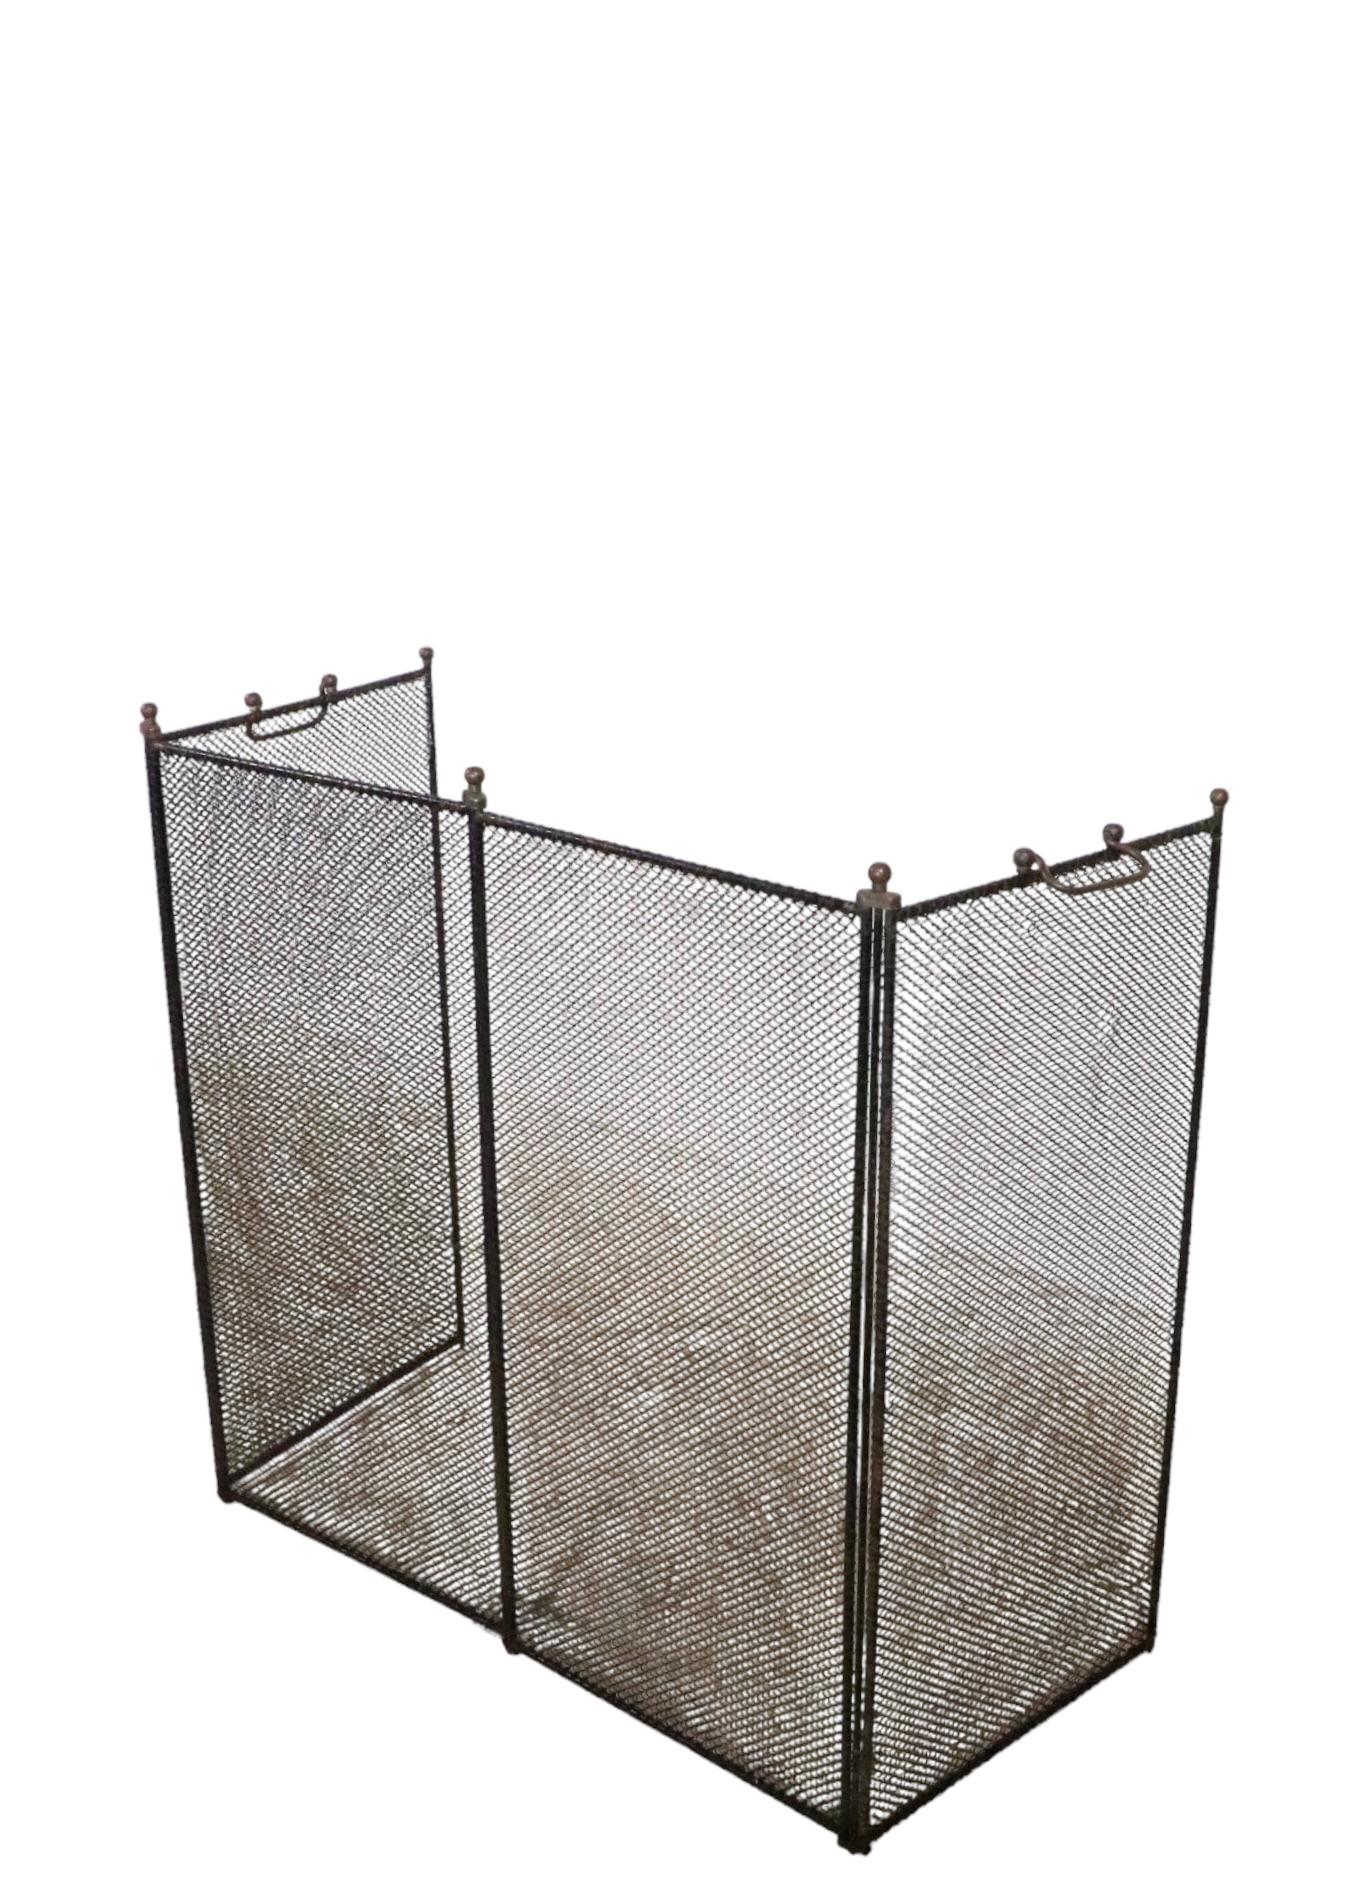 American Classical Antique Iron Brass and Mesh Four Panel Folding   Fireplace Screen 